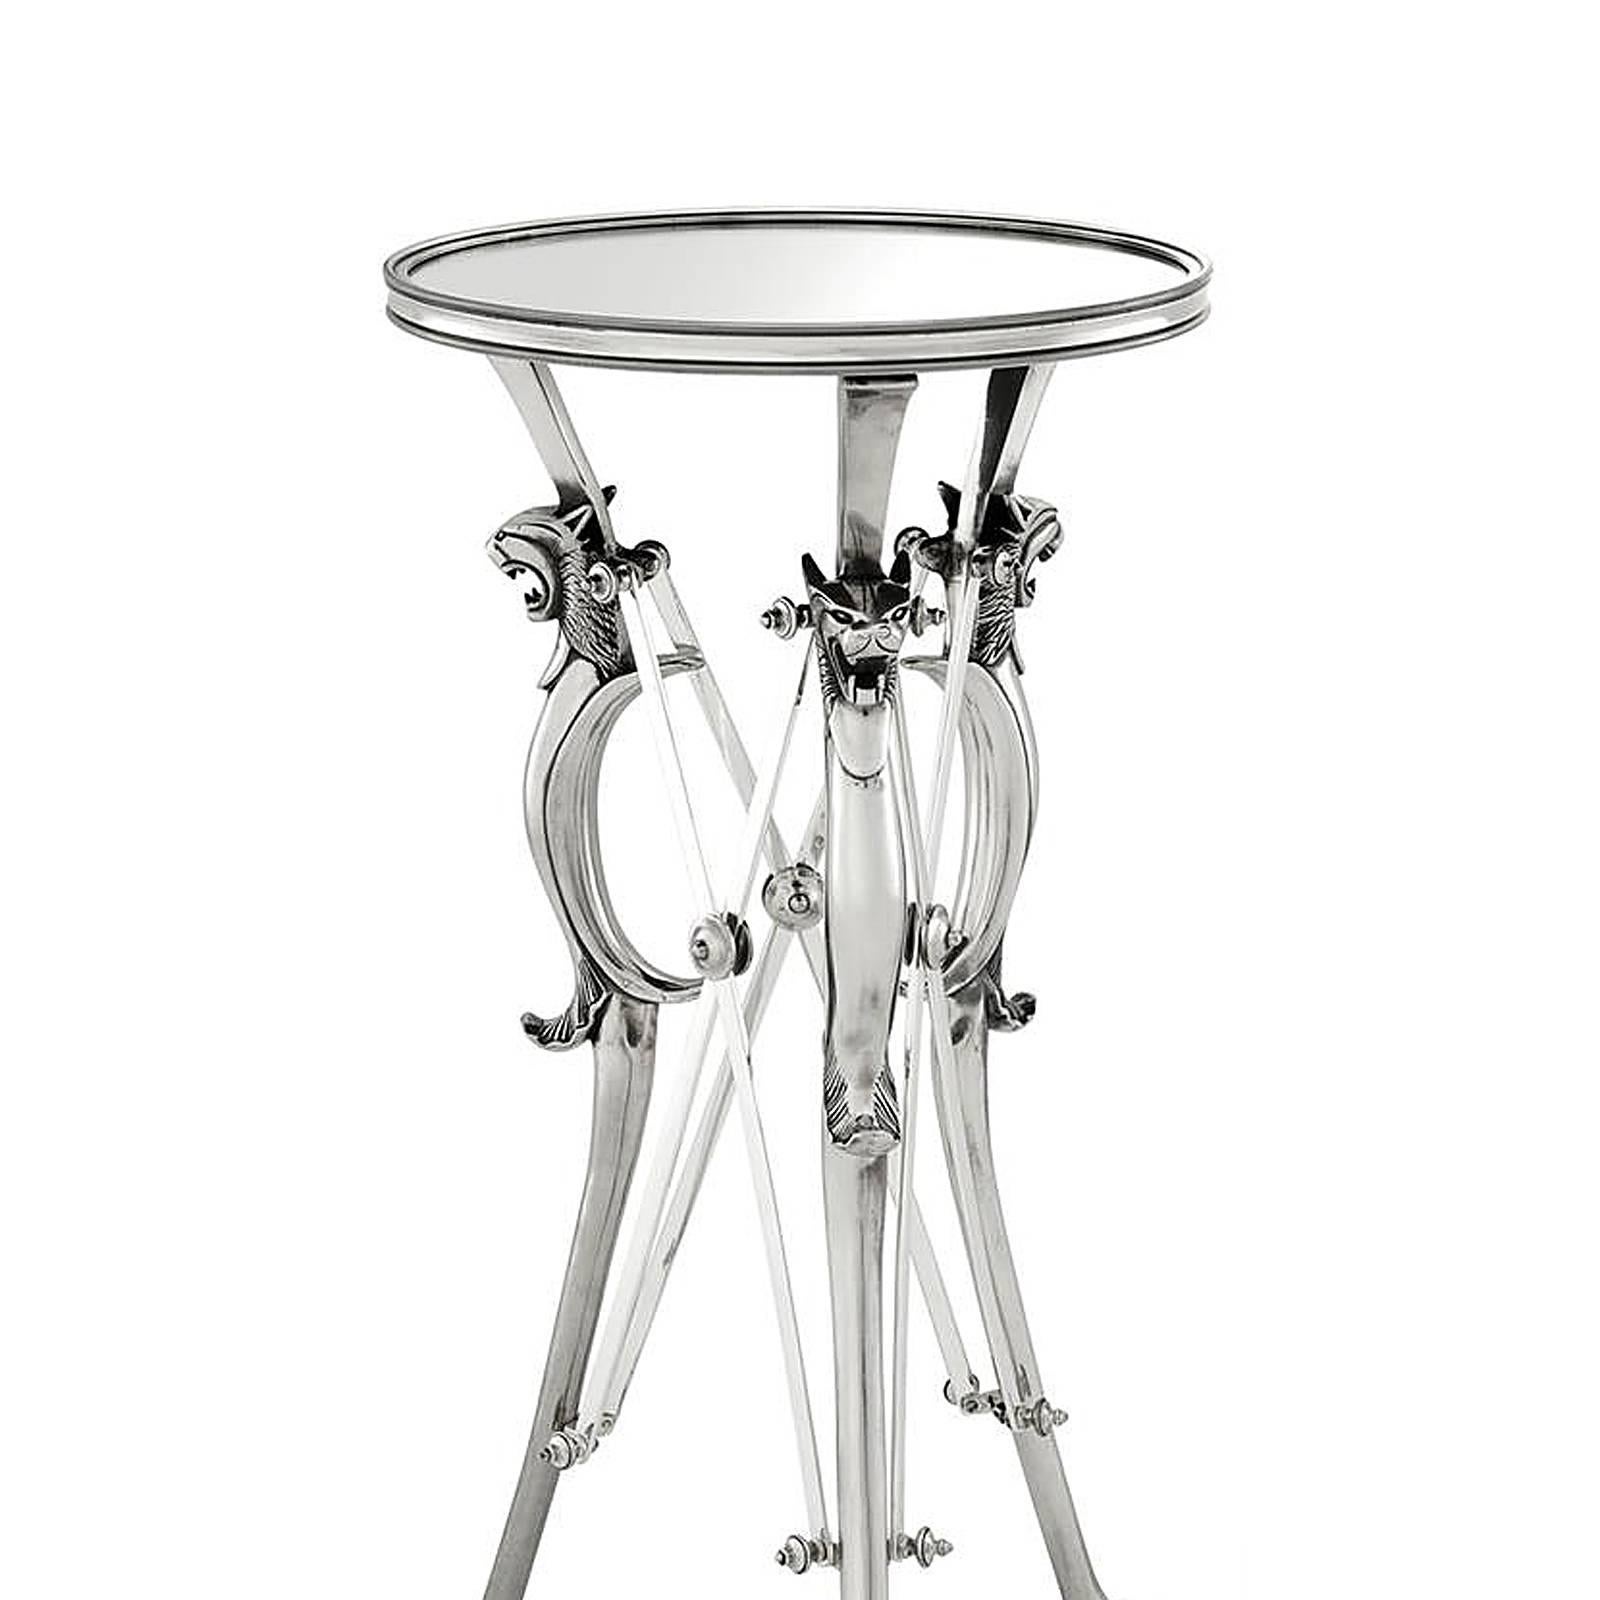 Column Feline with structure in antique 
silver plated finish. With mirror glass top.
Also available in side table Feline in
antique brass finish or antique silver finish.
